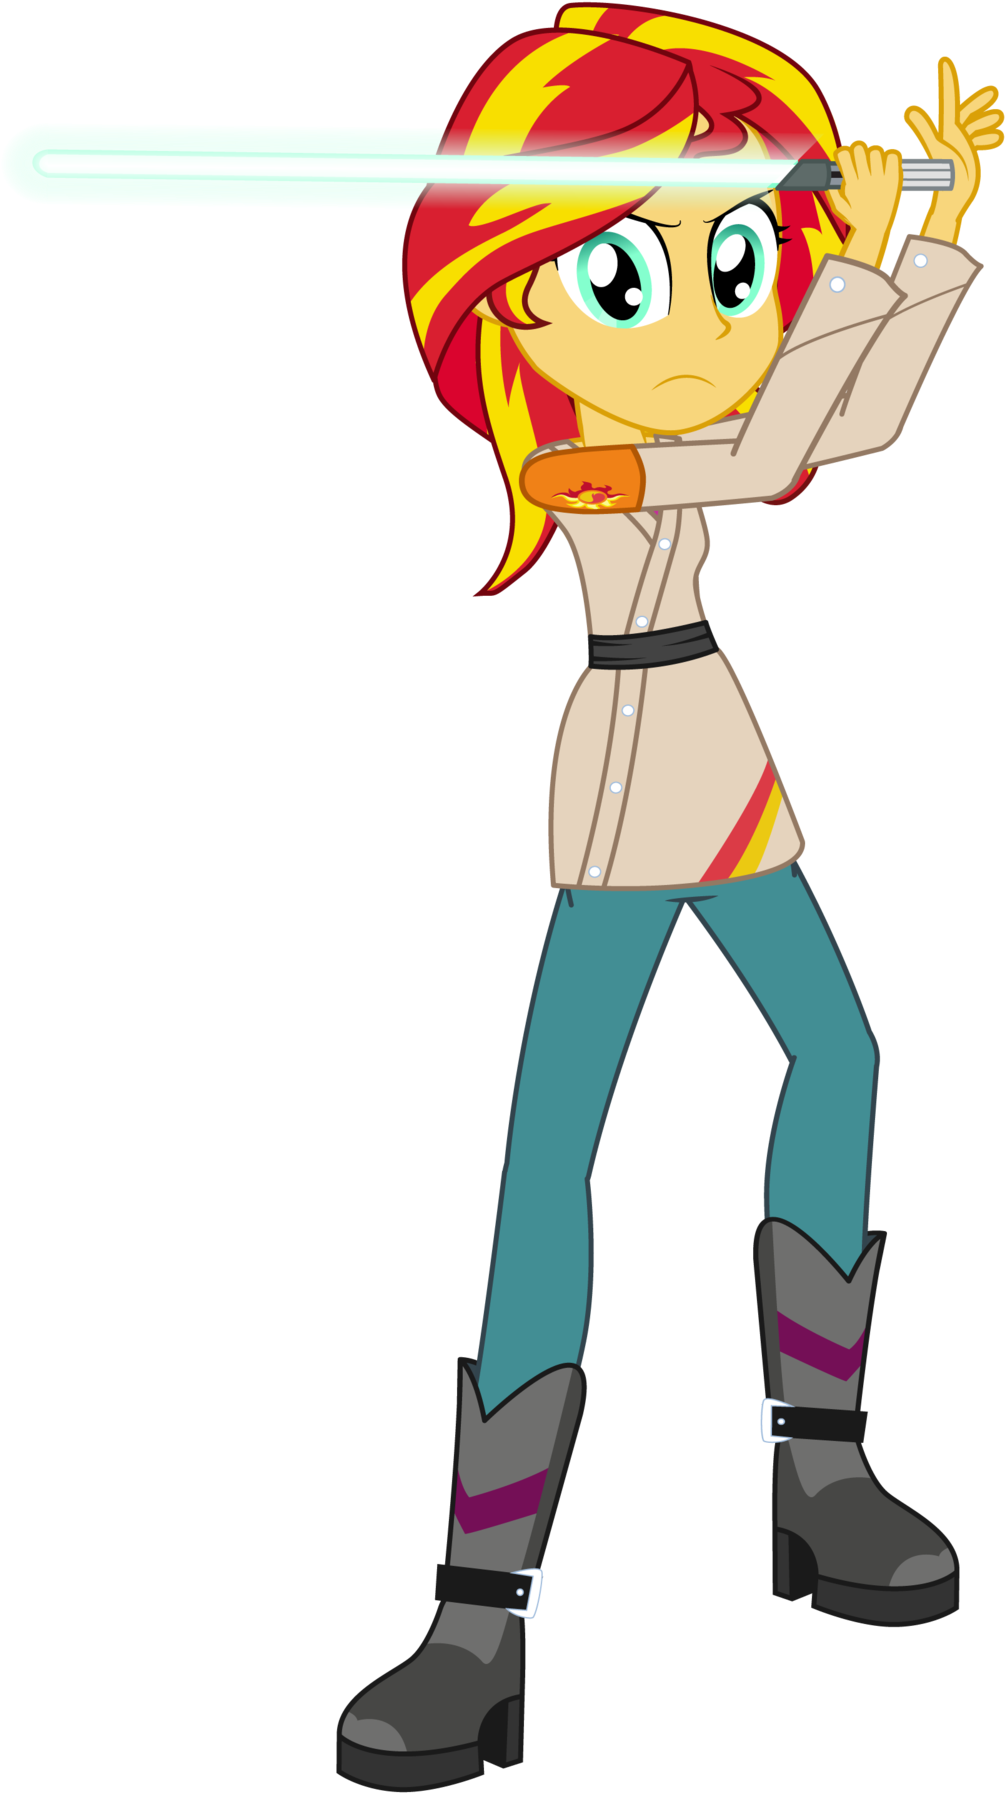 Sunset Shimmer Twilight Sparkle Pinkie Pie Rarity Clothing - My Little Pony: Friendship Is Magic (1024x1874)